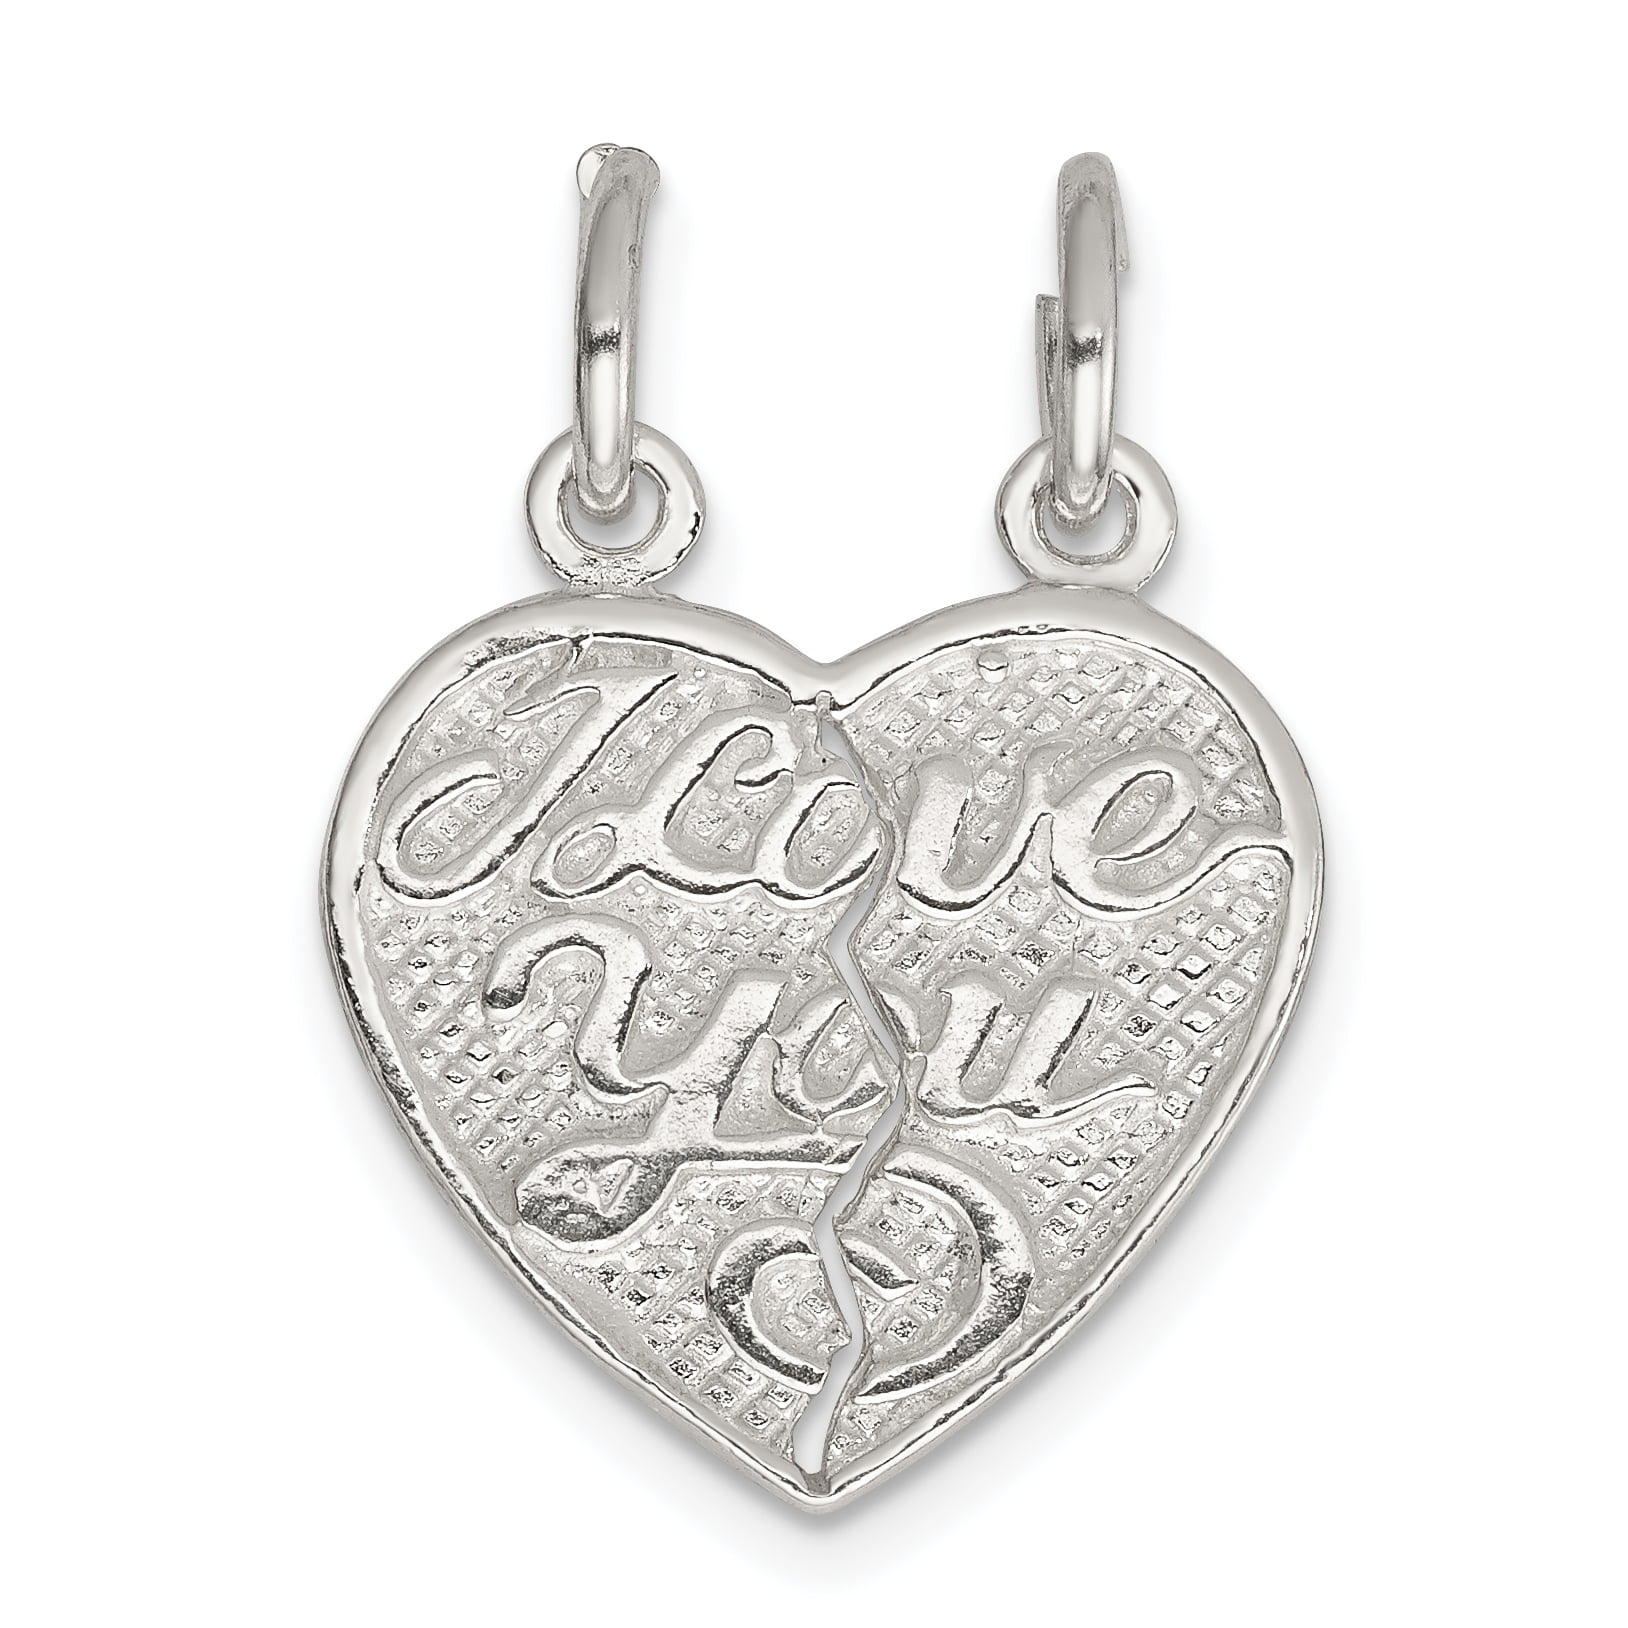 Friends Group Hug Heart Charm Bead. 925 Solid Sterling Silver Family 